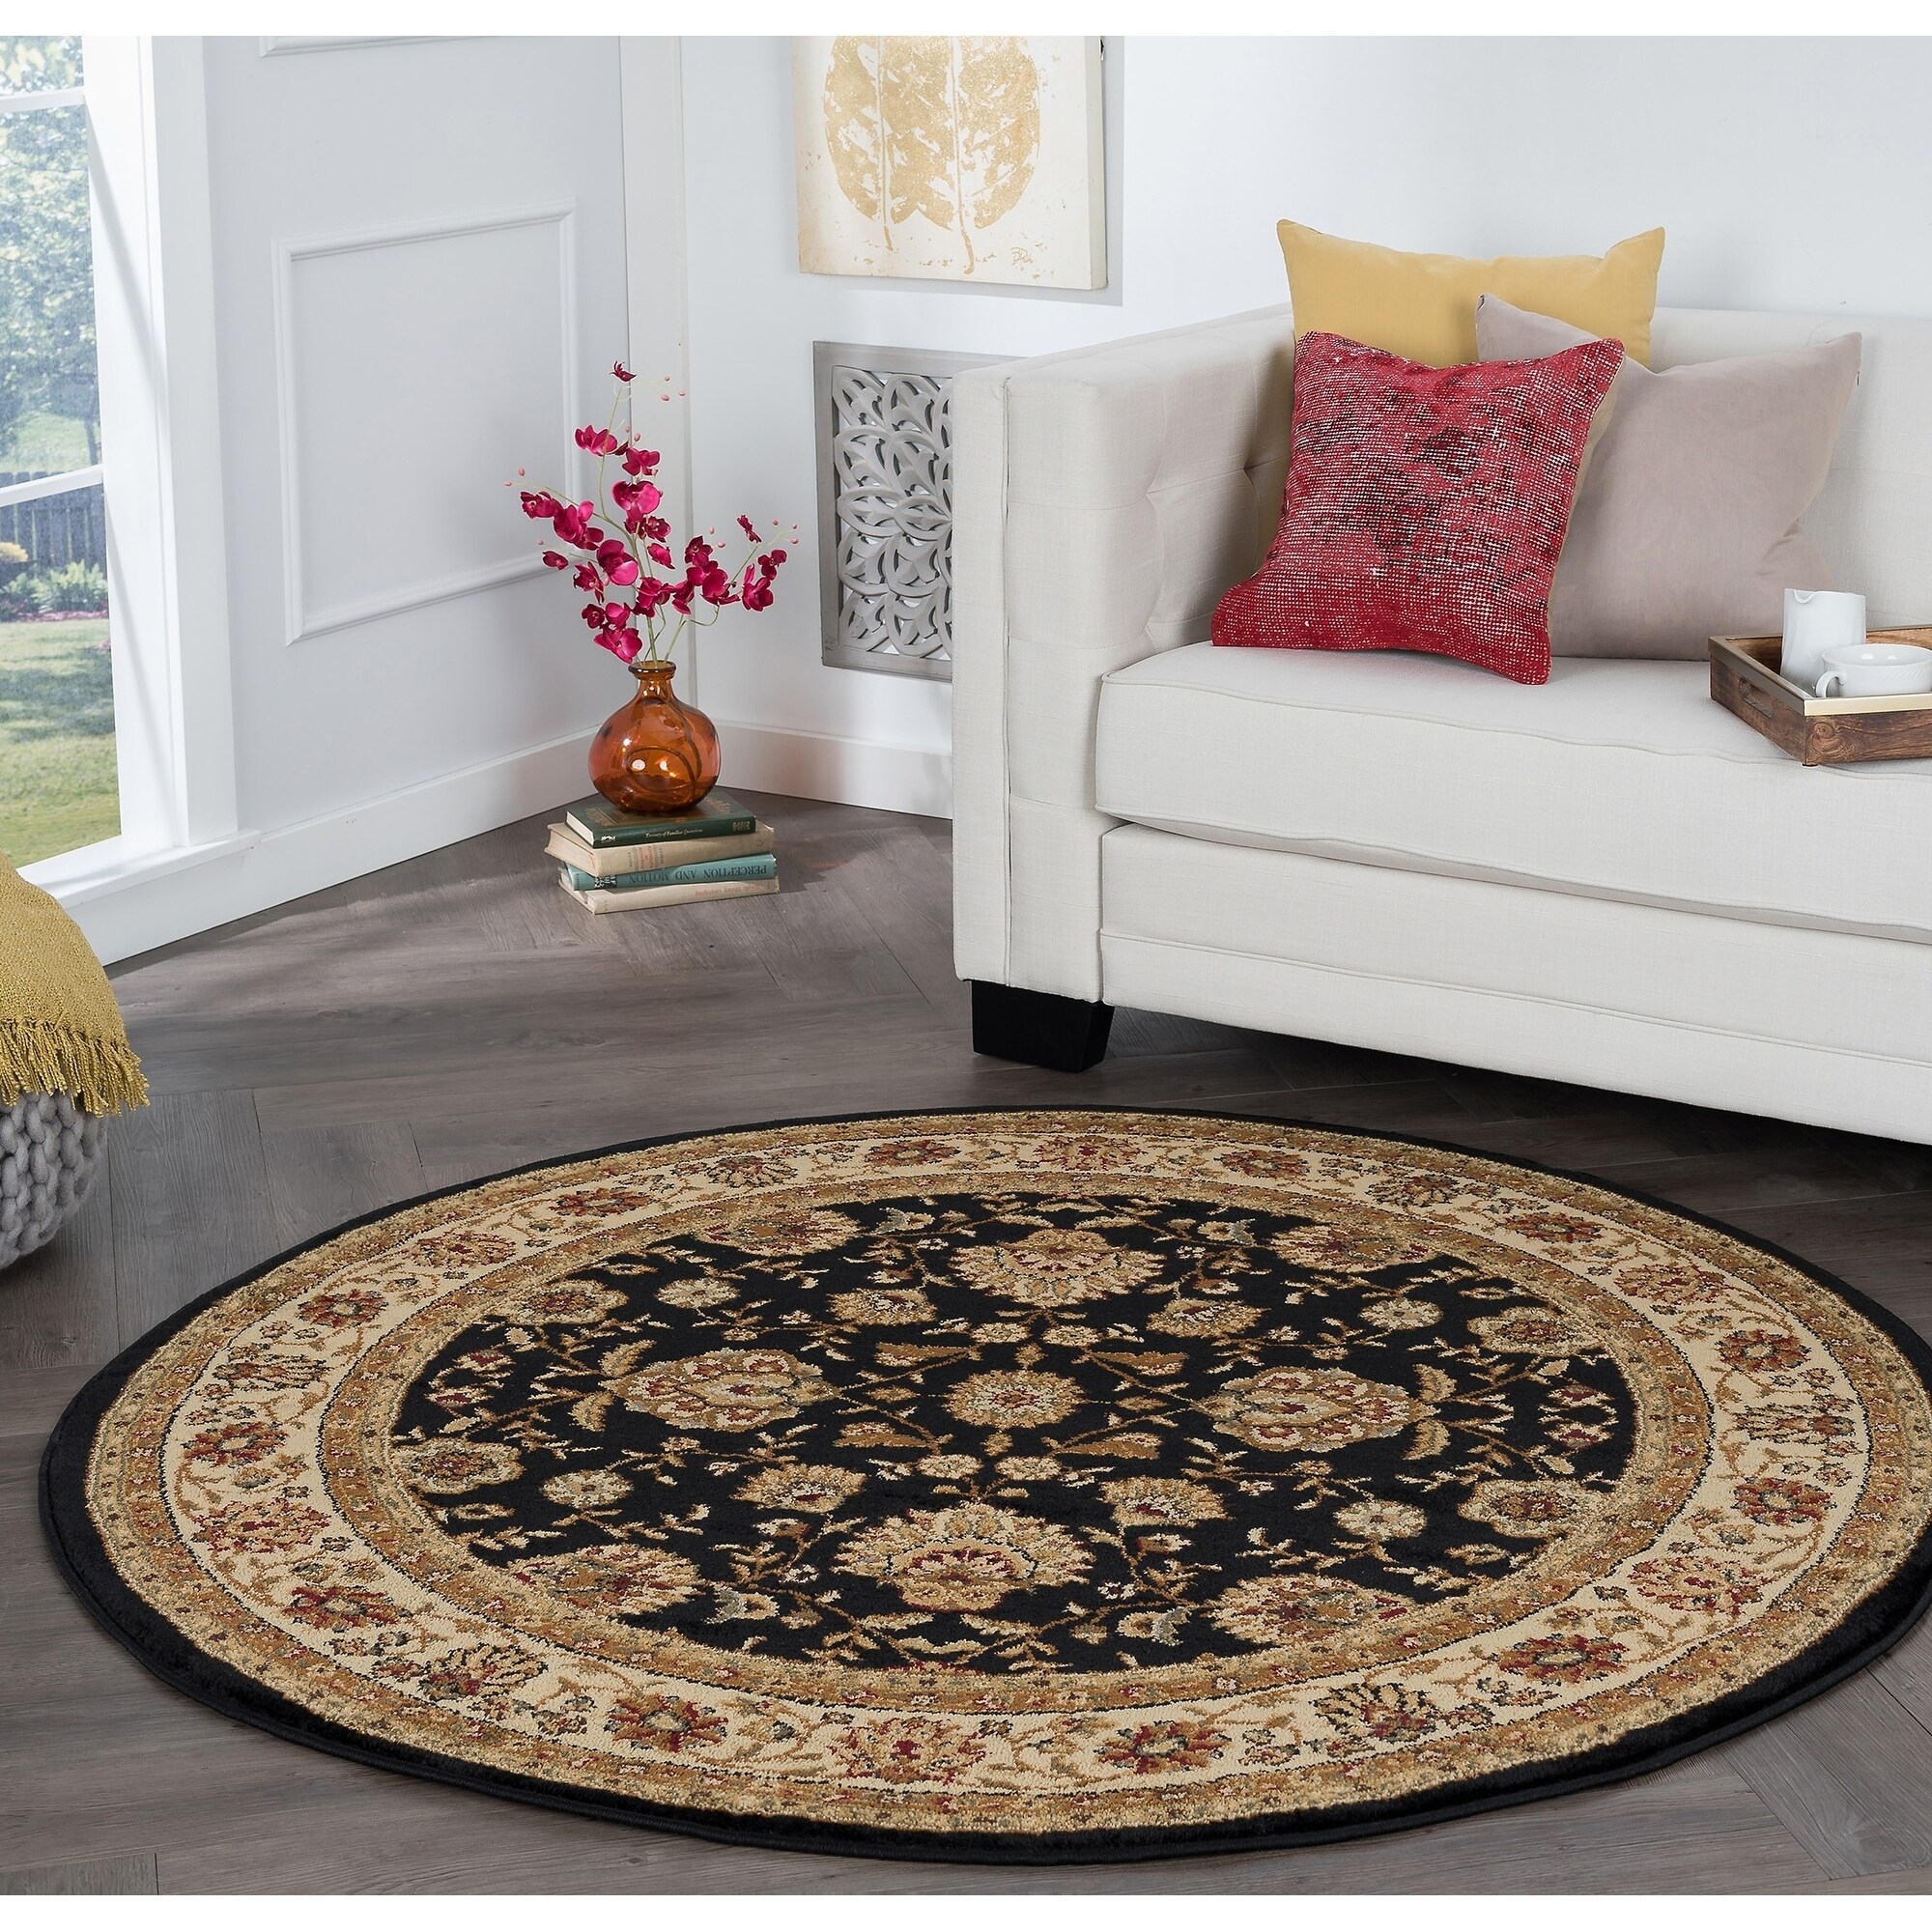 Rhythm 105143 Black Traditional Area Rug (5 3 Round) (BlackSecondary Colors Beige, red, greenShape RectangleTip We recommend the use of a non skid pad to keep the rug in place on smooth surfaces.All rug sizes are approximate. Due to the difference of m